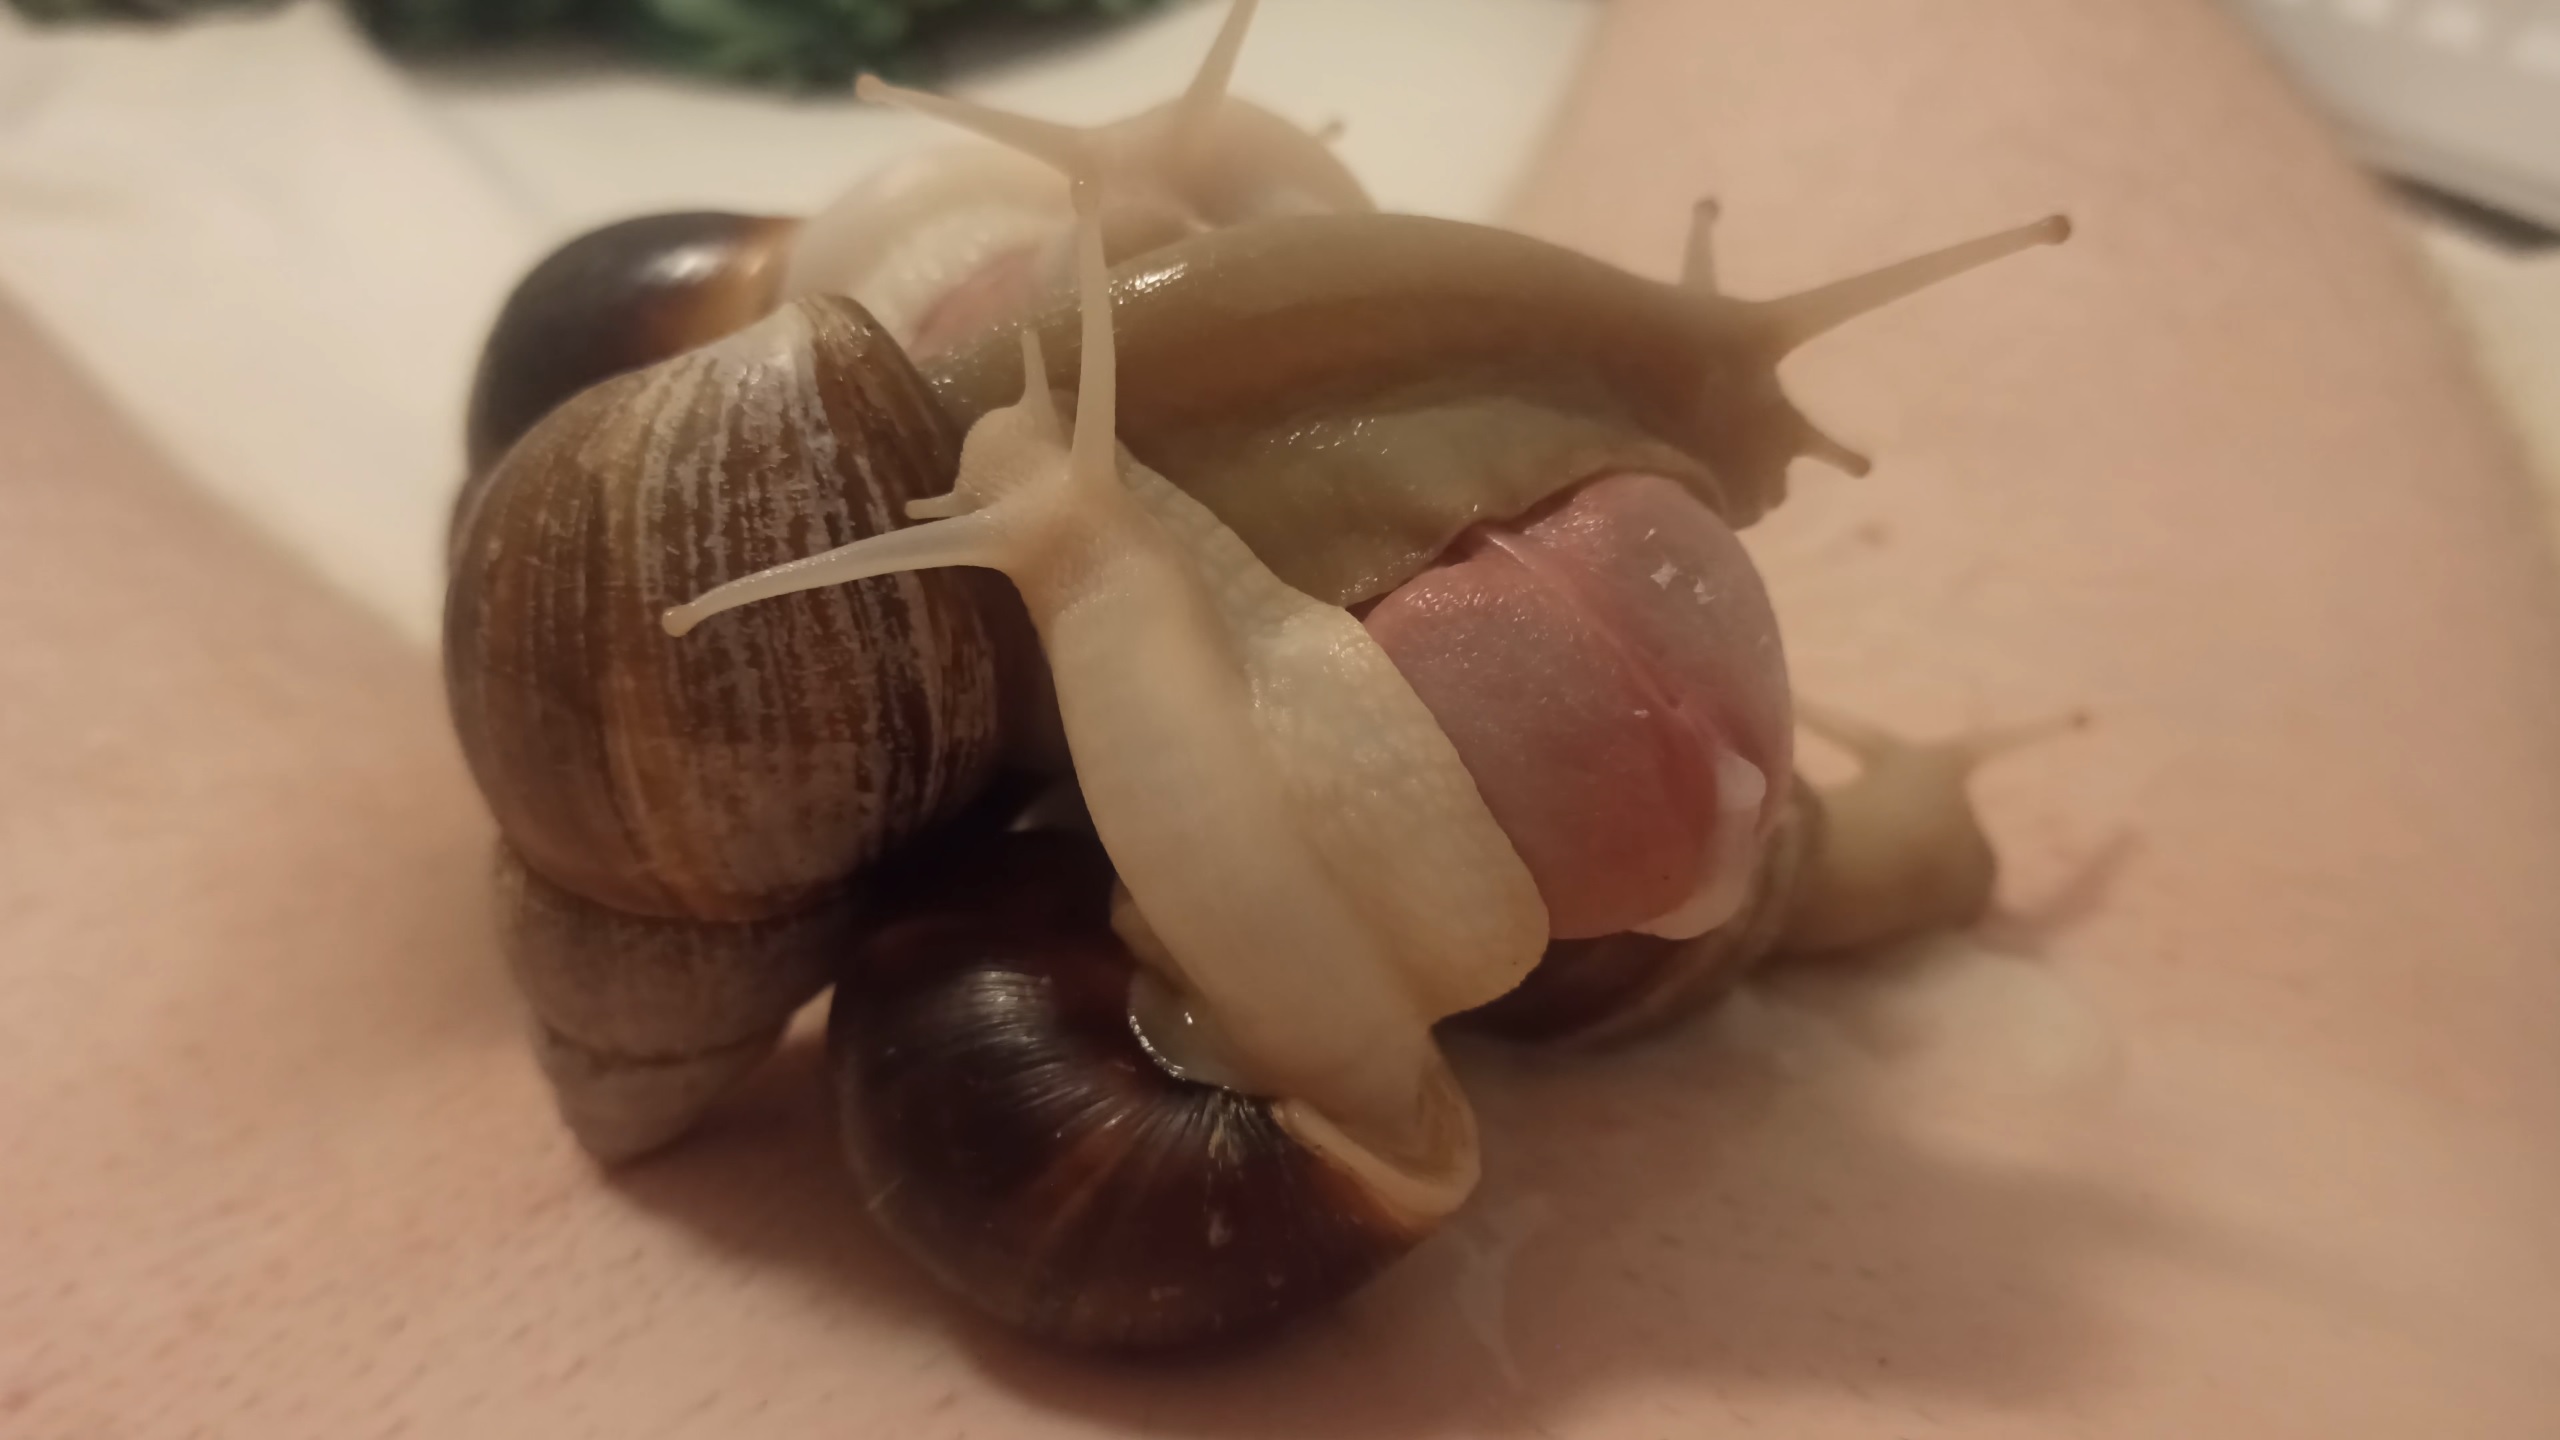 Huge snails dominate and milk my cock completely